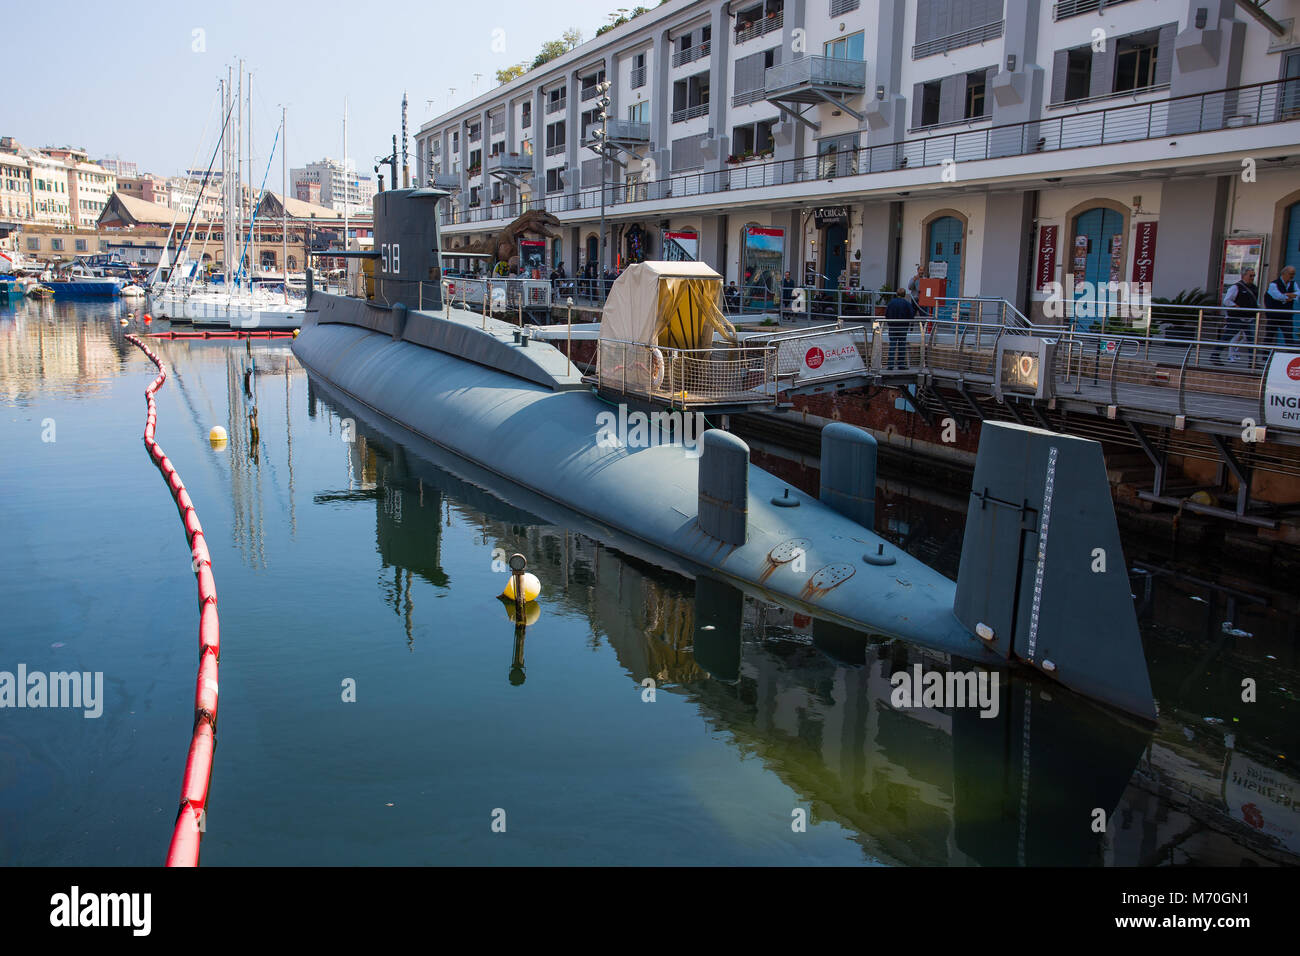 GENOA (Genova), ITALY, APRIL 12, 2017 - Nazario Sauro 518 submarine is a diesel-powered submarine of the Italian Navy. It is currently a museum ship m Stock Photo